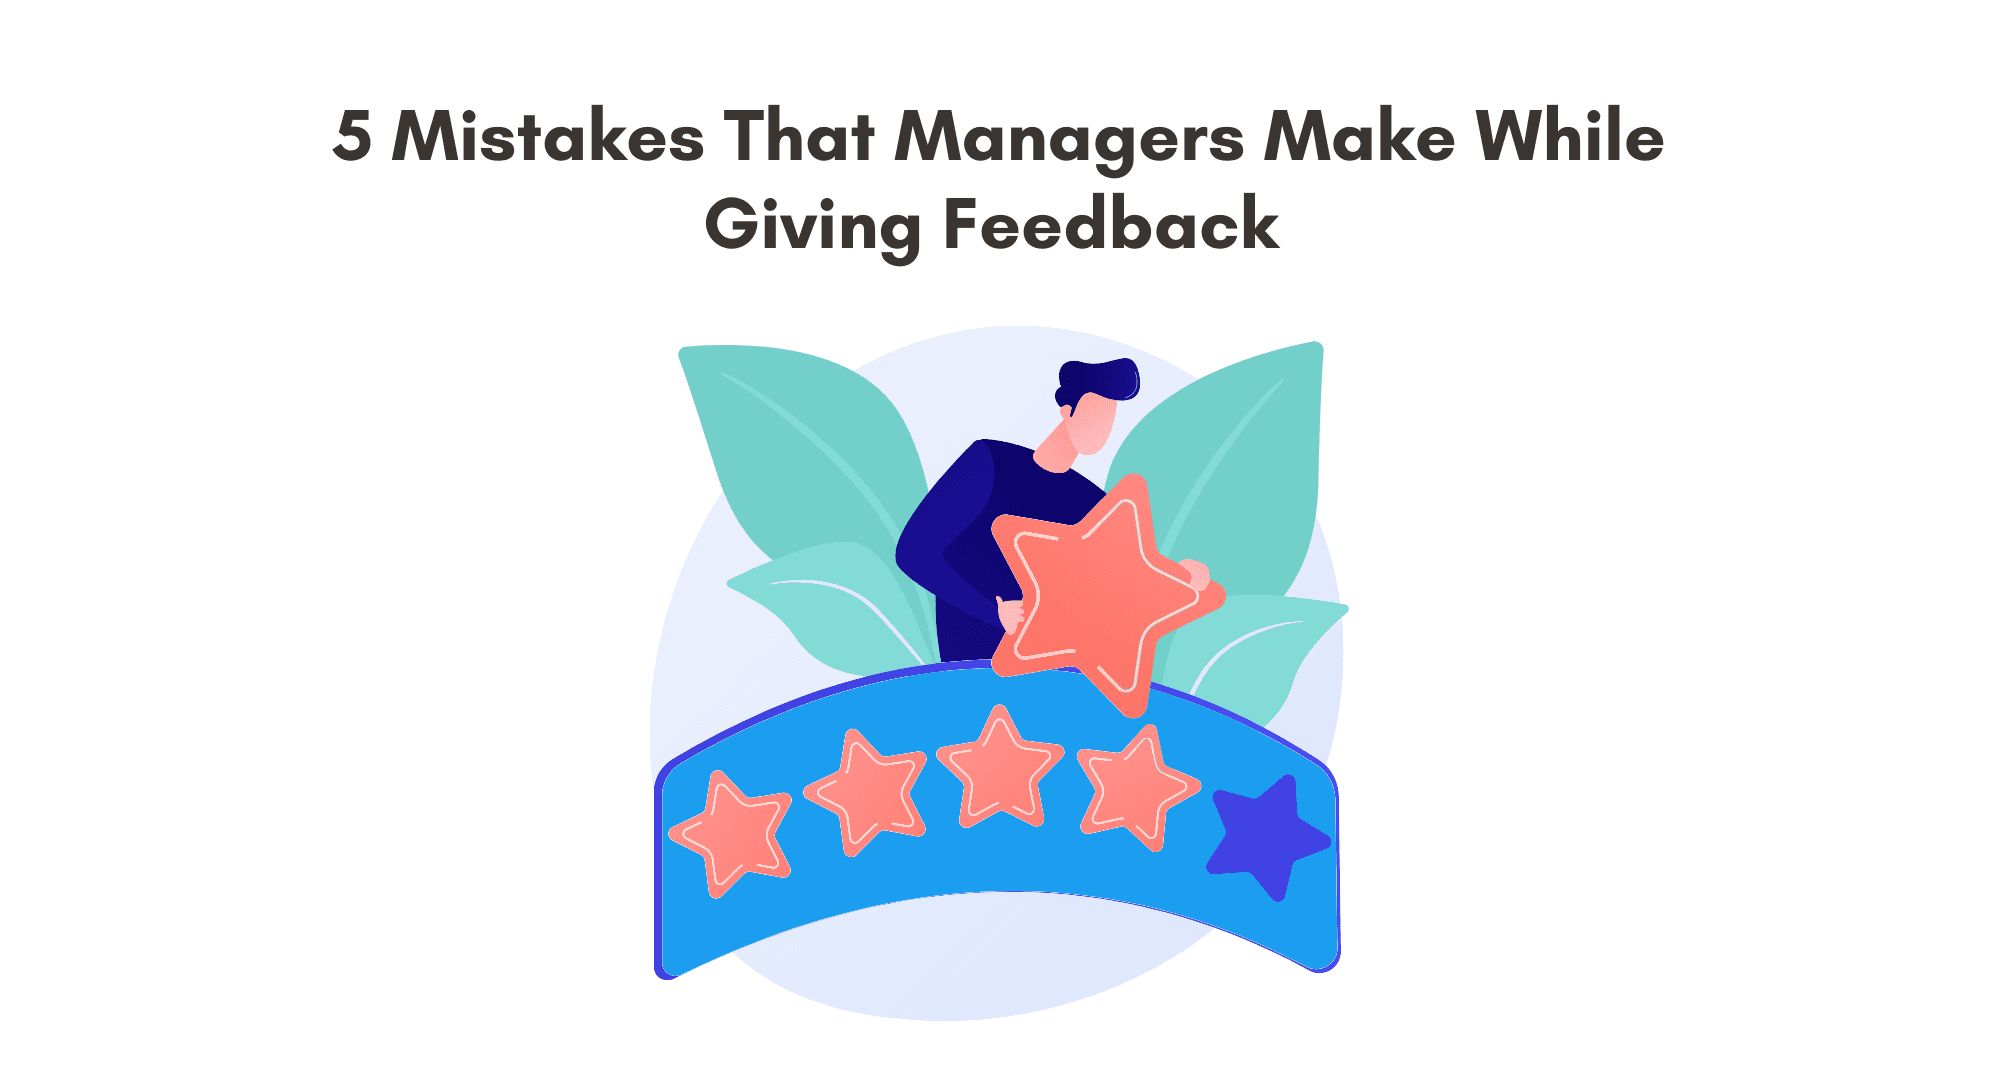 5 mistakes that managers make while giving feedback. What are the mistakes that managers make while giving feedback. How to avoid mistakes while giving feedback. Employee feedback.